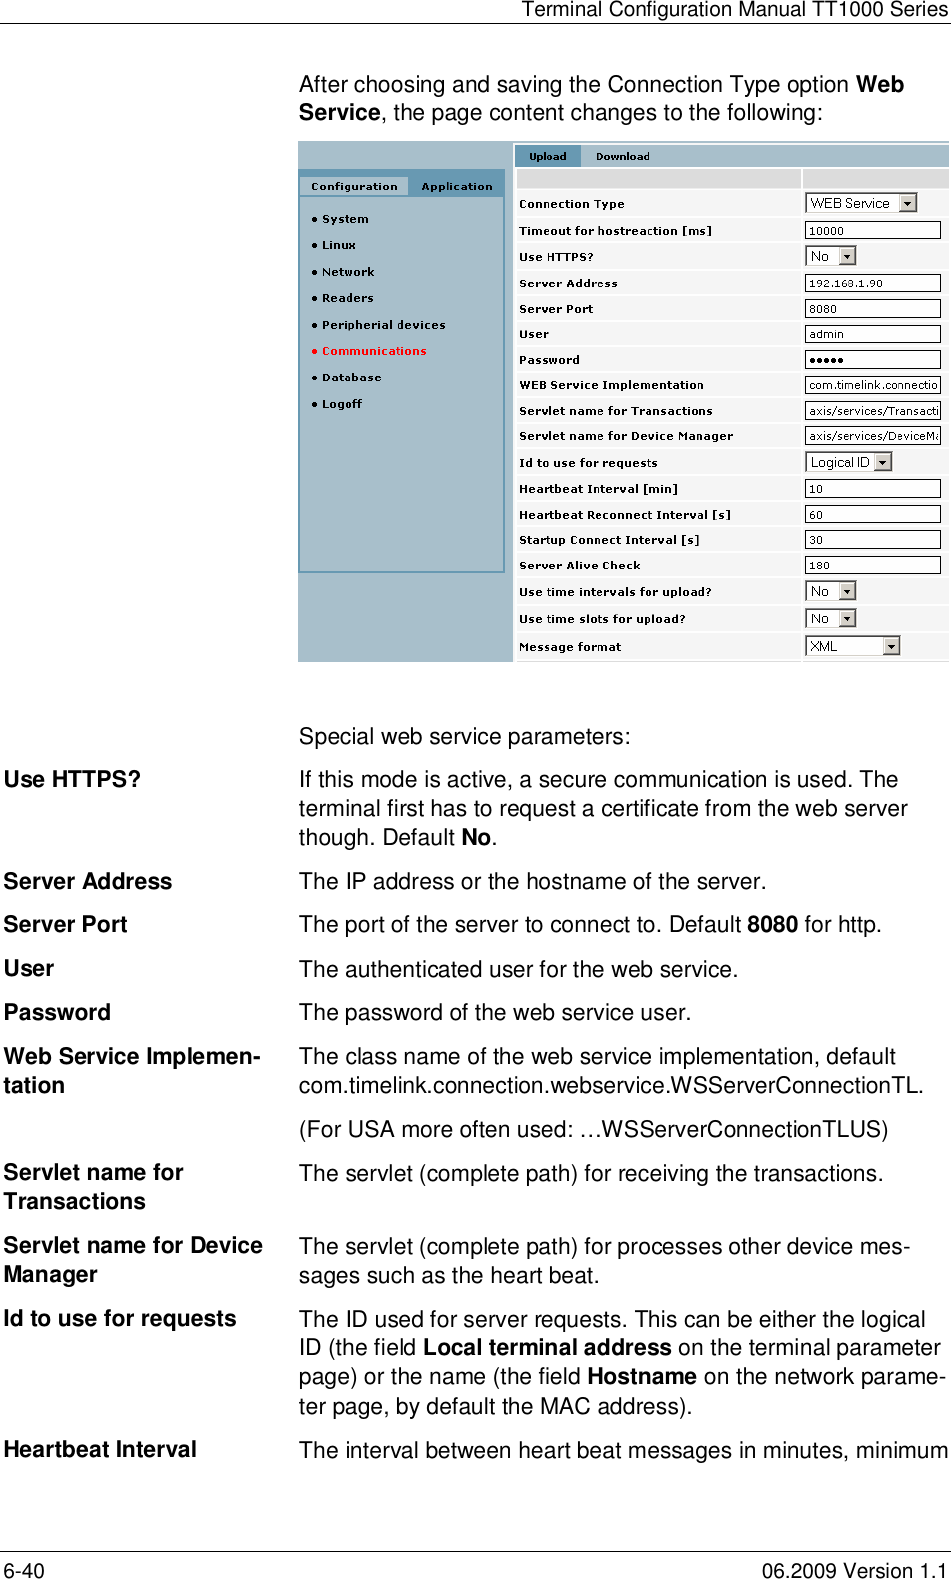 Terminal Configuration Manual TT1000 Series6-40 06.2009 Version 1.1After choosing and saving the Connection Type option WebService, the page content changes to the following:Special web service parameters:Use HTTPS? If this mode is active, a secure communication is used. Theterminal first has to request a certificate from the web serverthough. Default No.Server Address The IP address or the hostname of the server.Server Port The port of the server to connect to. Default 8080 for http.User The authenticated user for the web service.Password The password of the web service user.Web Service Implemen-tation The class name of the web service implementation, defaultcom.timelink.connection.webservice.WSServerConnectionTL.(For USA more often used: …WSServerConnectionTLUS)Servlet name forTransactions The servlet (complete path) for receiving the transactions.Servlet name for DeviceManager The servlet (complete path) for processes other device mes-sages such as the heart beat.Id to use for requests The ID used for server requests. This can be either the logicalID (the field Local terminal address on the terminal parameterpage) or the name (the field Hostname on the network parame-ter page, by default the MAC address).Heartbeat Interval The interval between heart beat messages in minutes, minimum